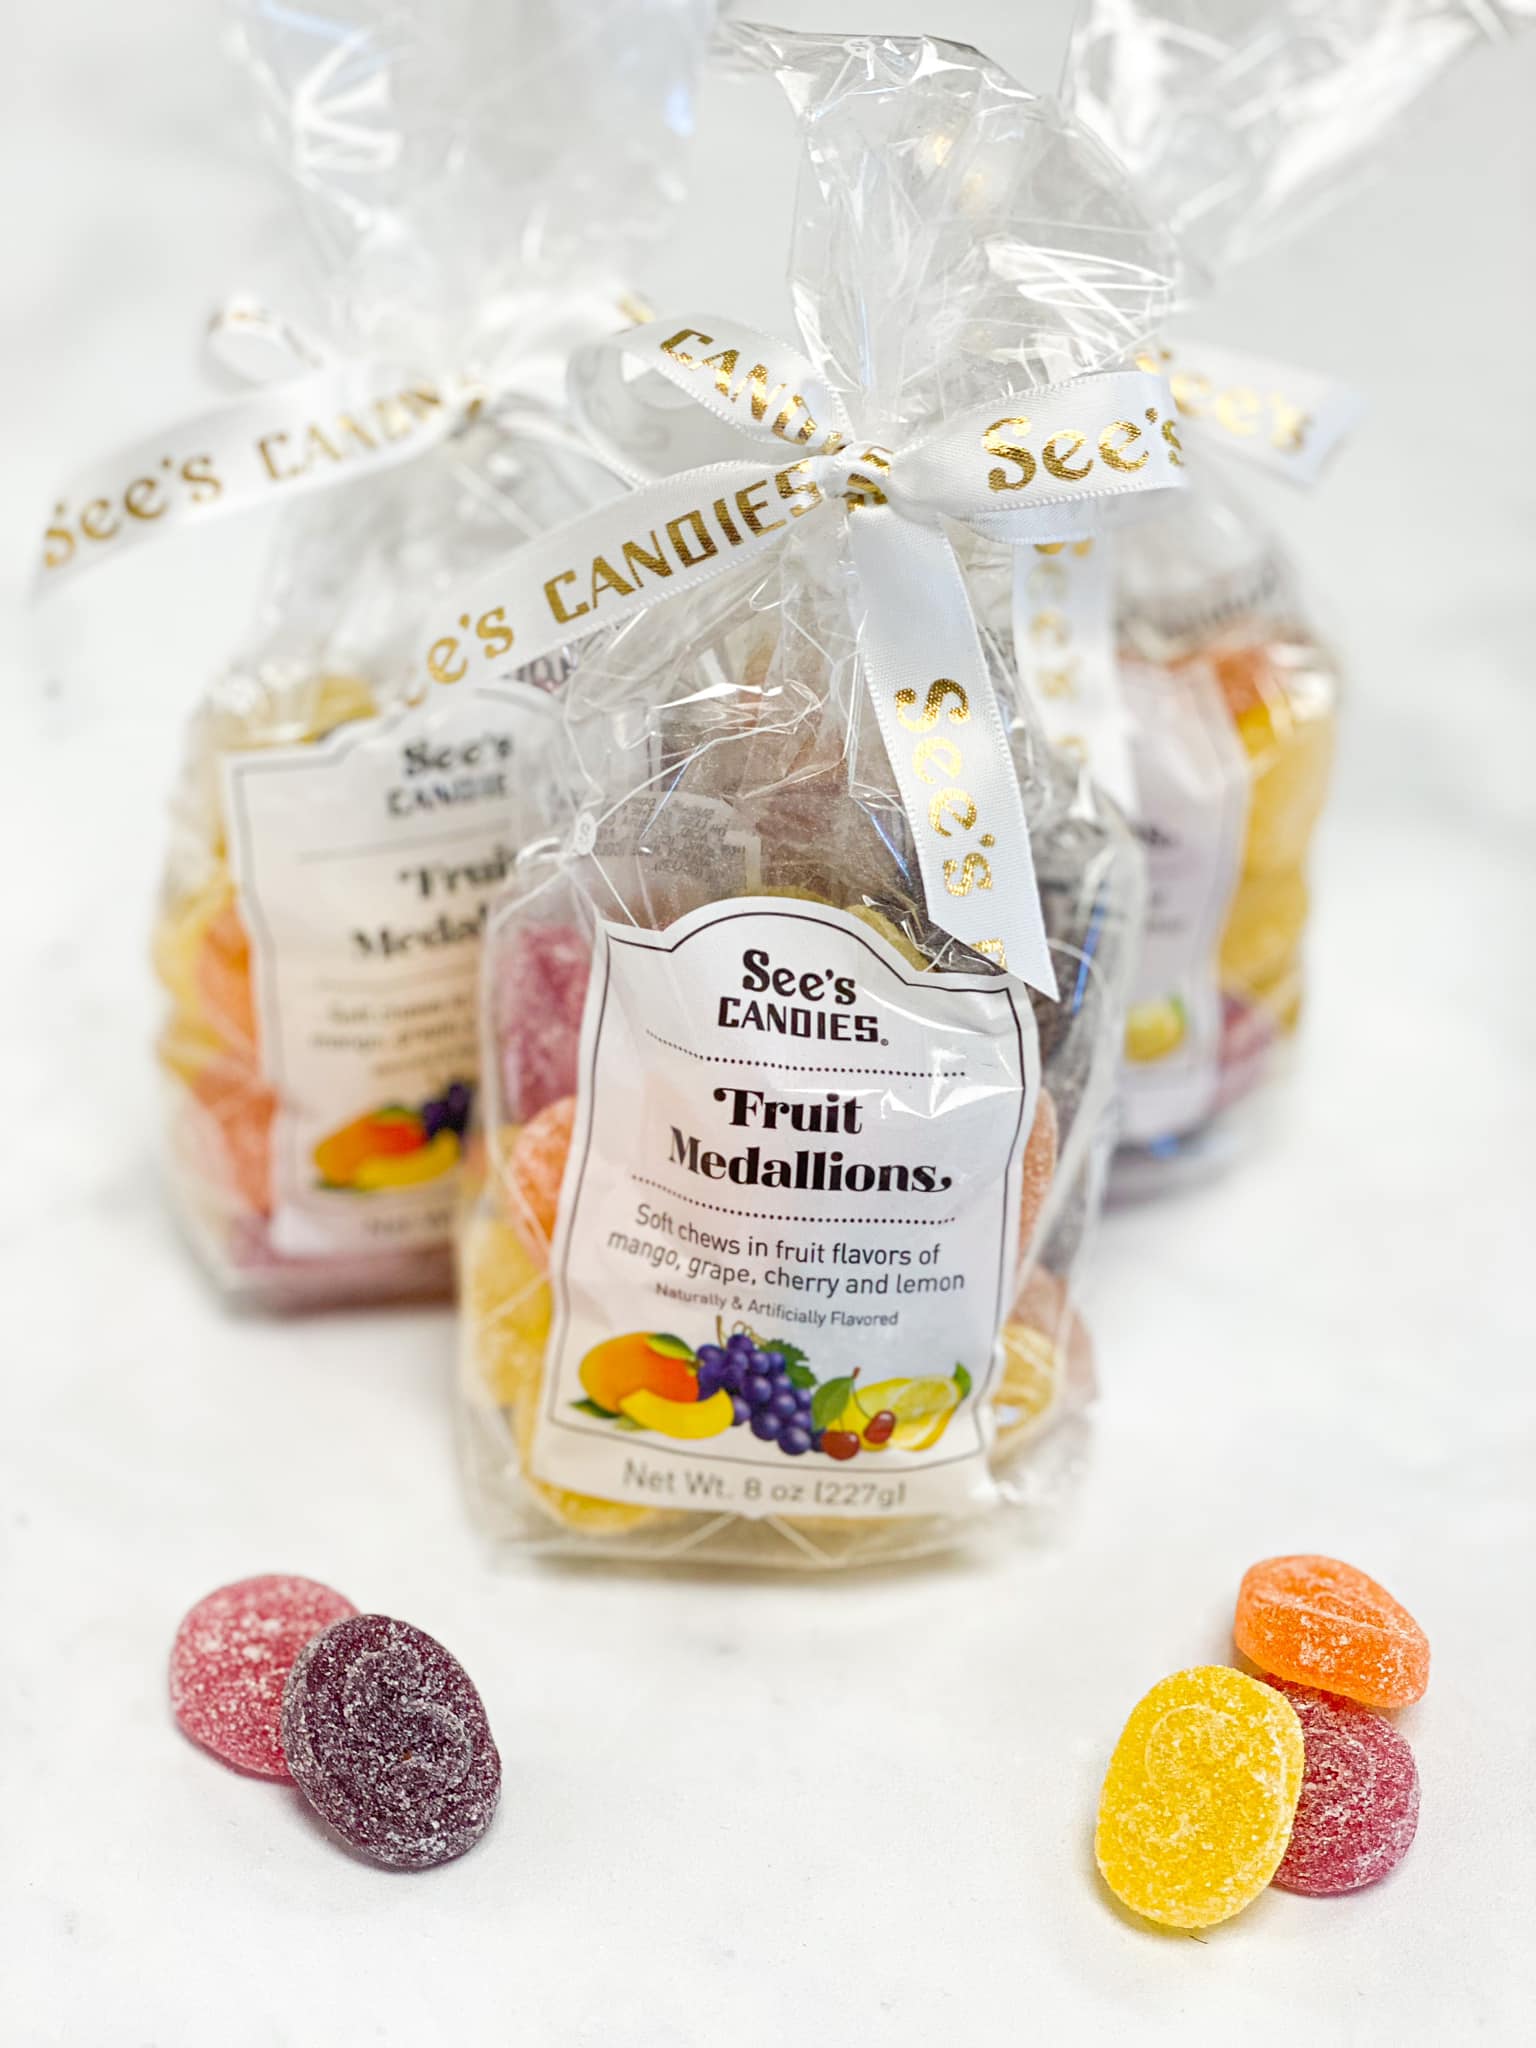 Have you heard?! We just released 4 NEW flavors of Fruit Medallions, all of them bursting with sun-ripened flavors of 🍒, 🥭, 🍇 and 🍋